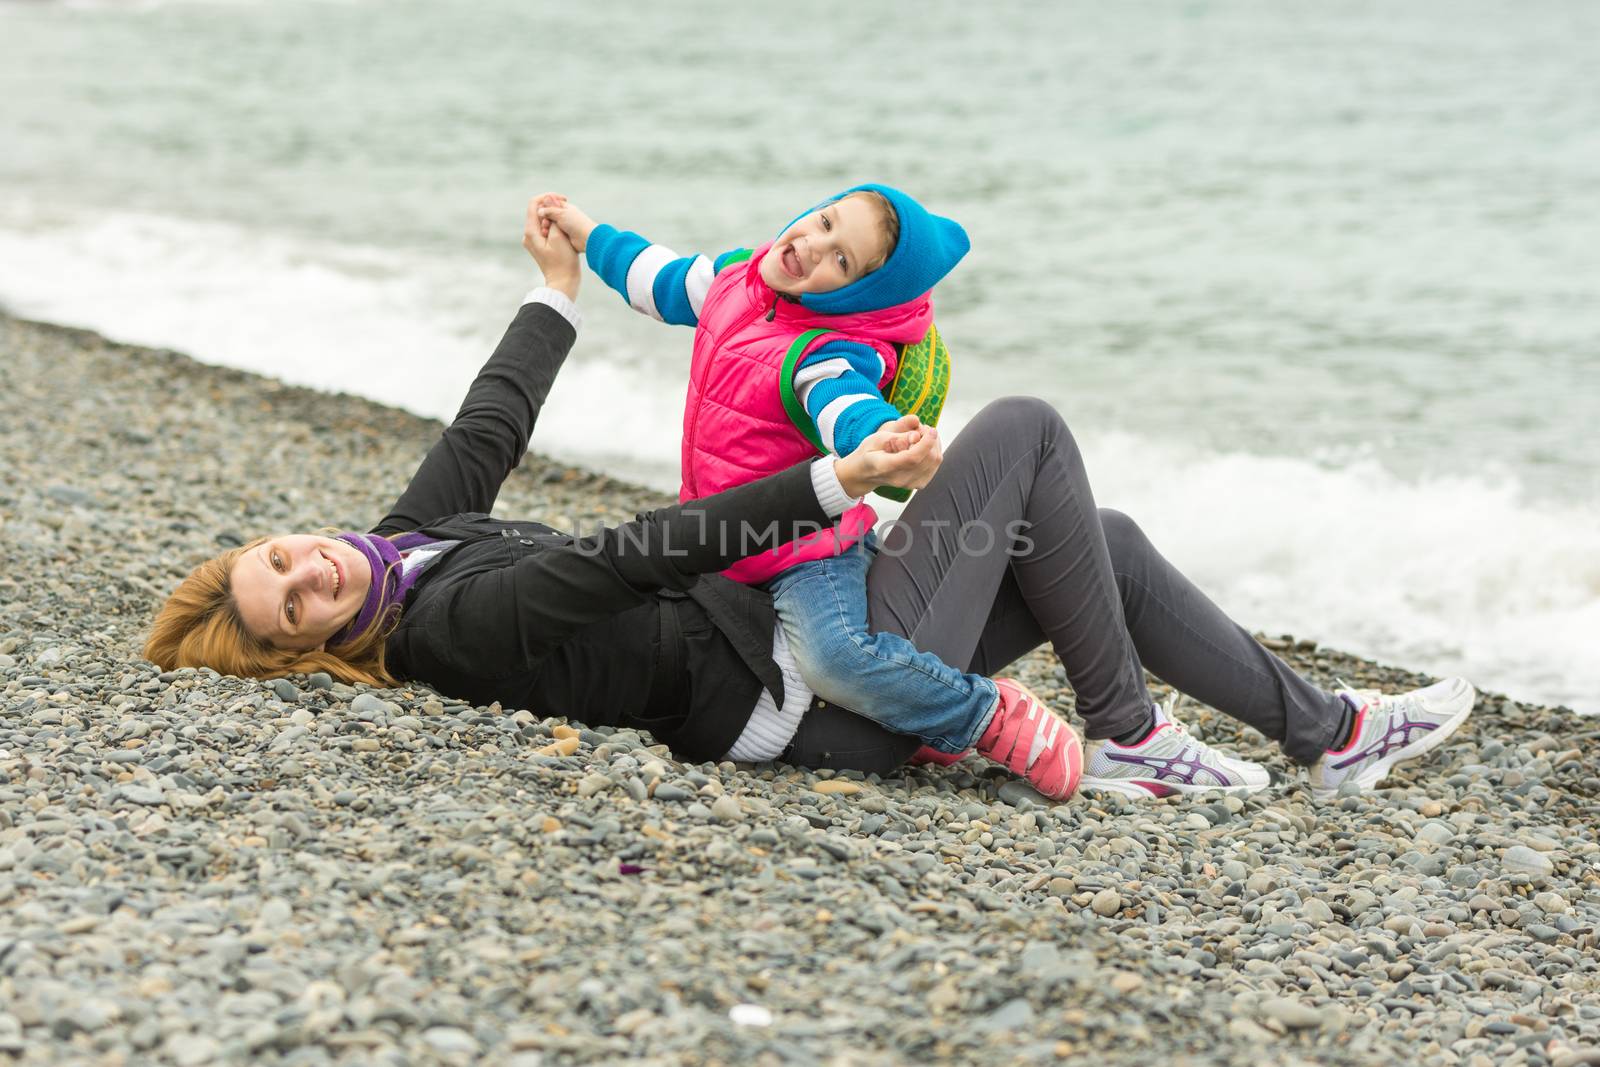 Five-year girl with her mother having fun on the beach pebble beach in cold weather